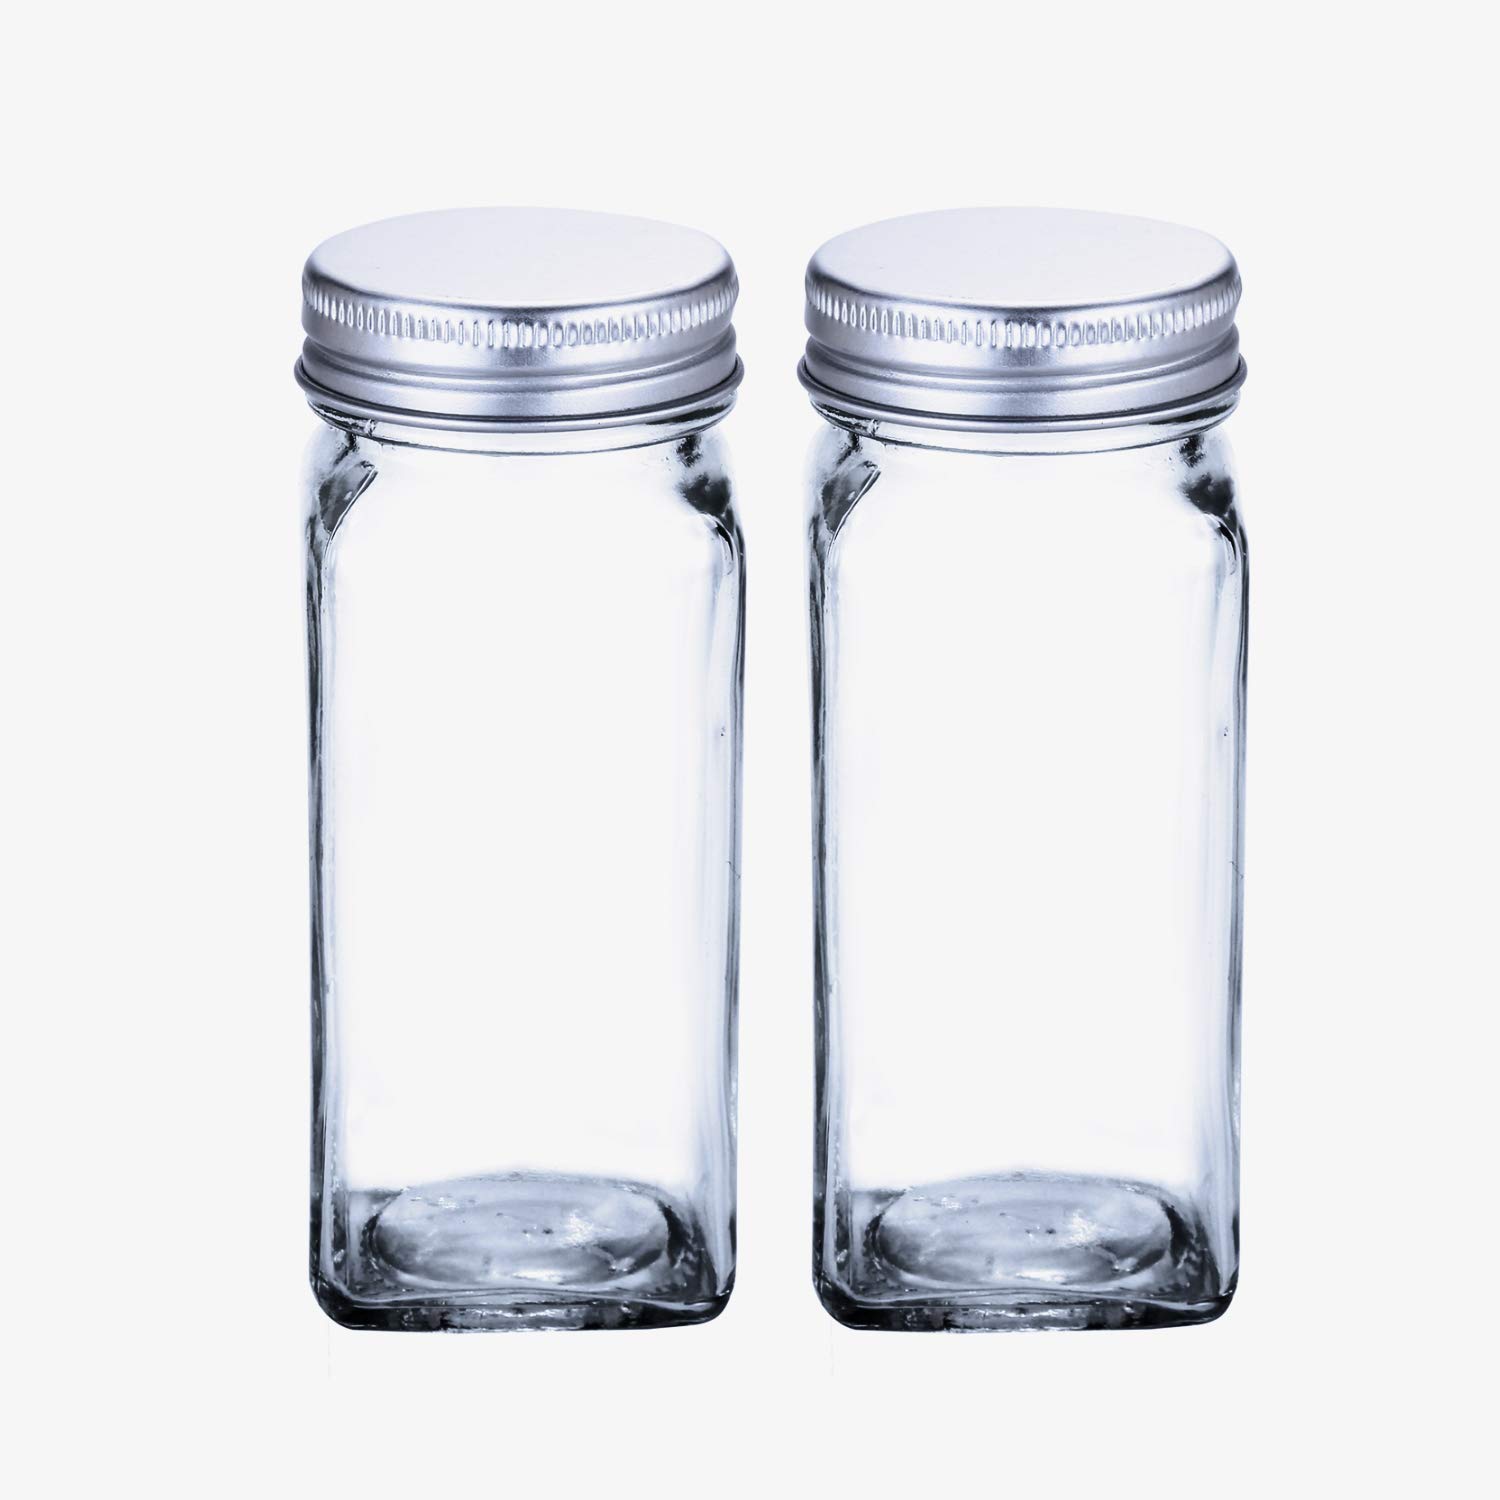 SWOMMOLY Replacement Glass Spice Jars/Square